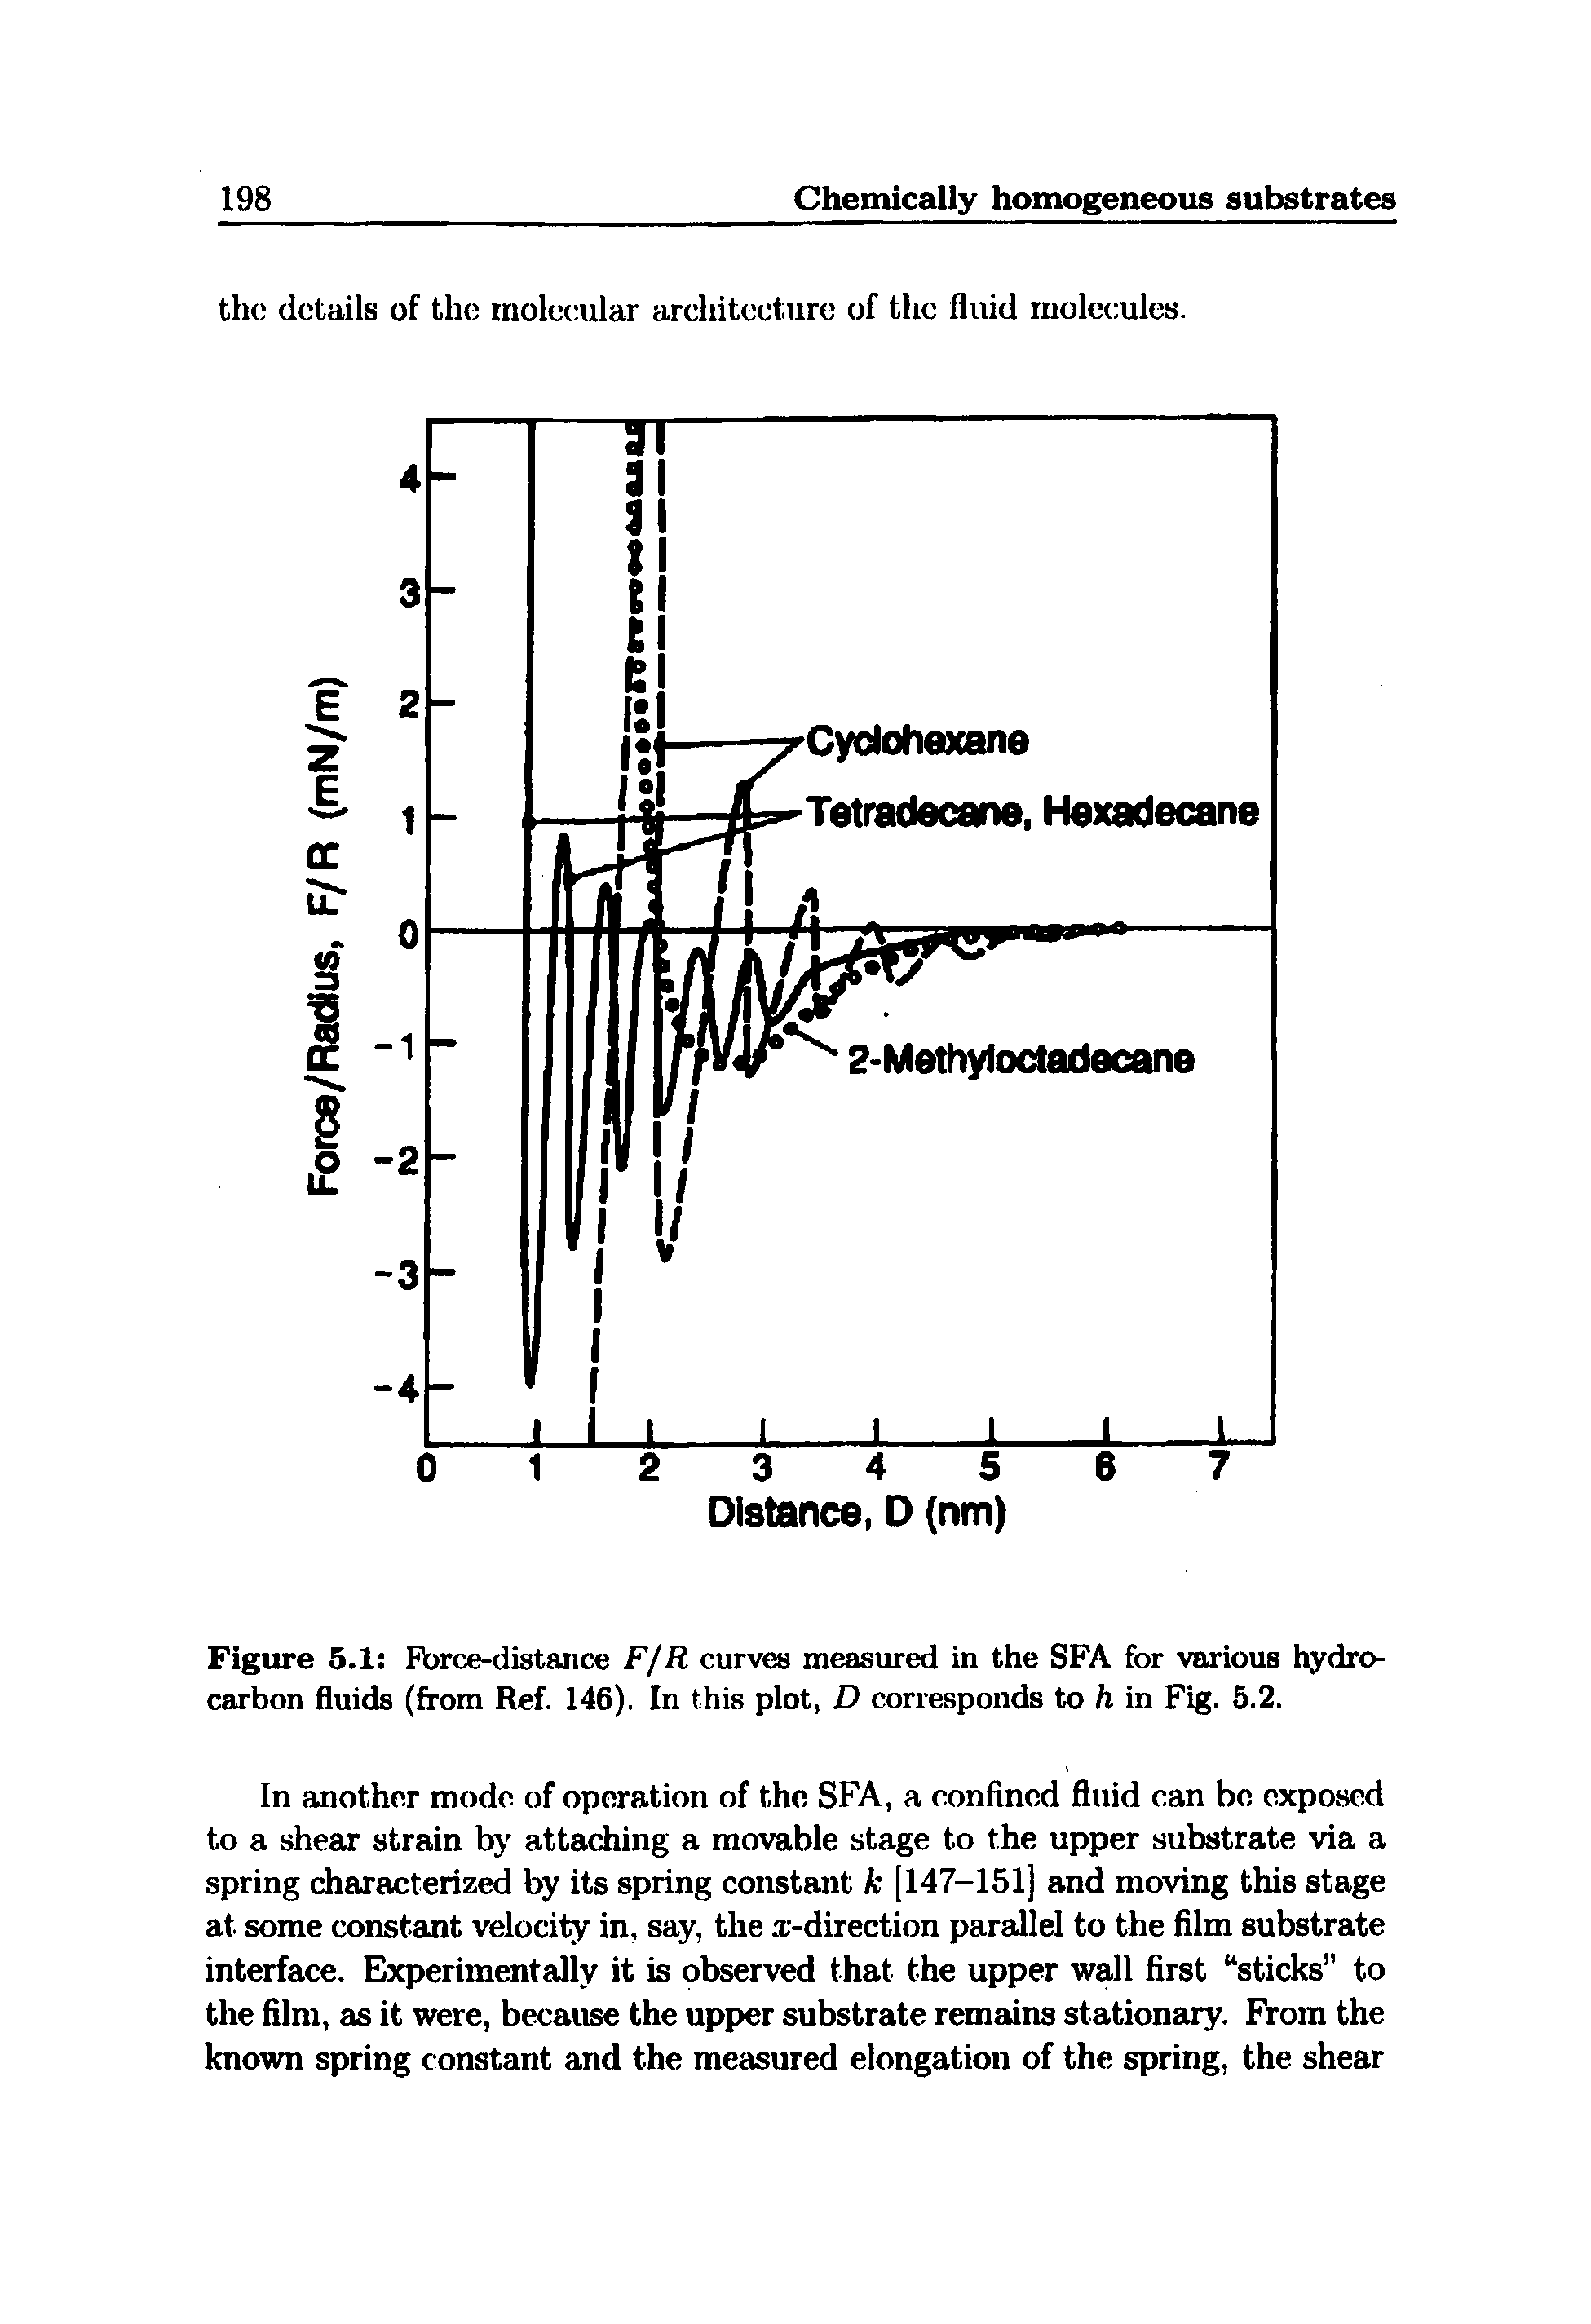 Figure 5.1 Force-distance F/R curves measured in the SFA for various hydrocarbon fluids (from Ref. 146). In this plot, D corresponds to h in Fig. 5.2.